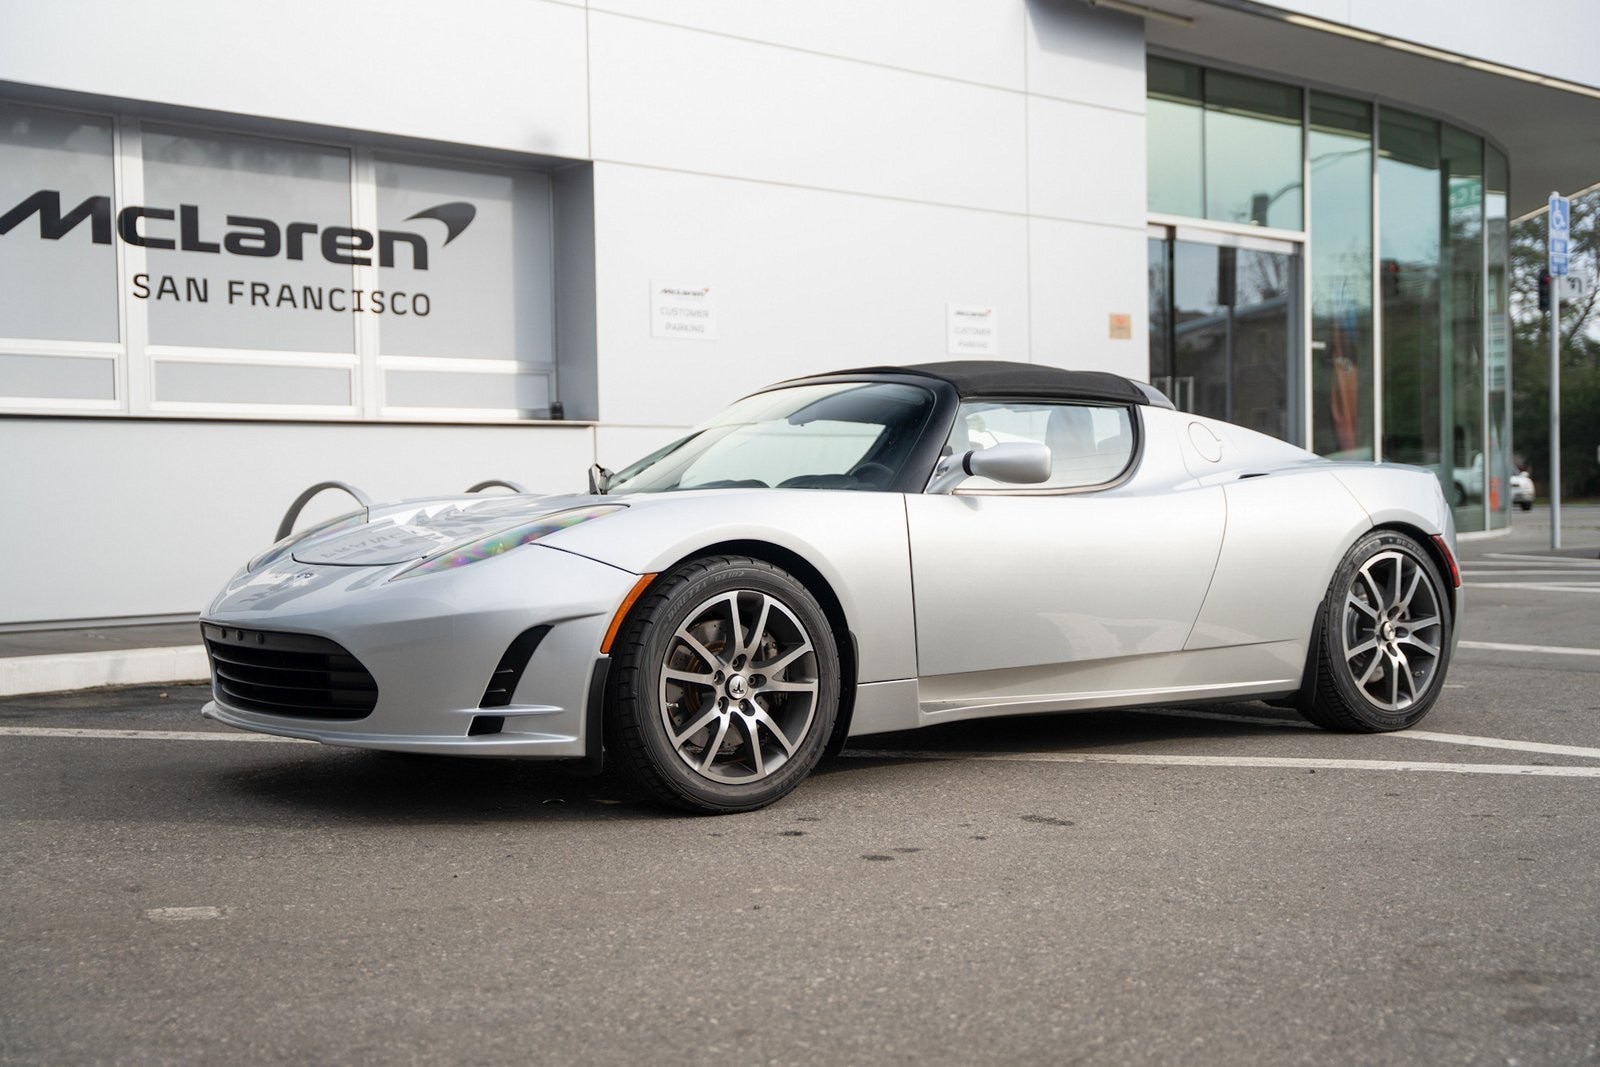 Used 2011 Tesla Roadster  with VIN 5YJRE1A14B1001238 for sale in Palo Alto, CA